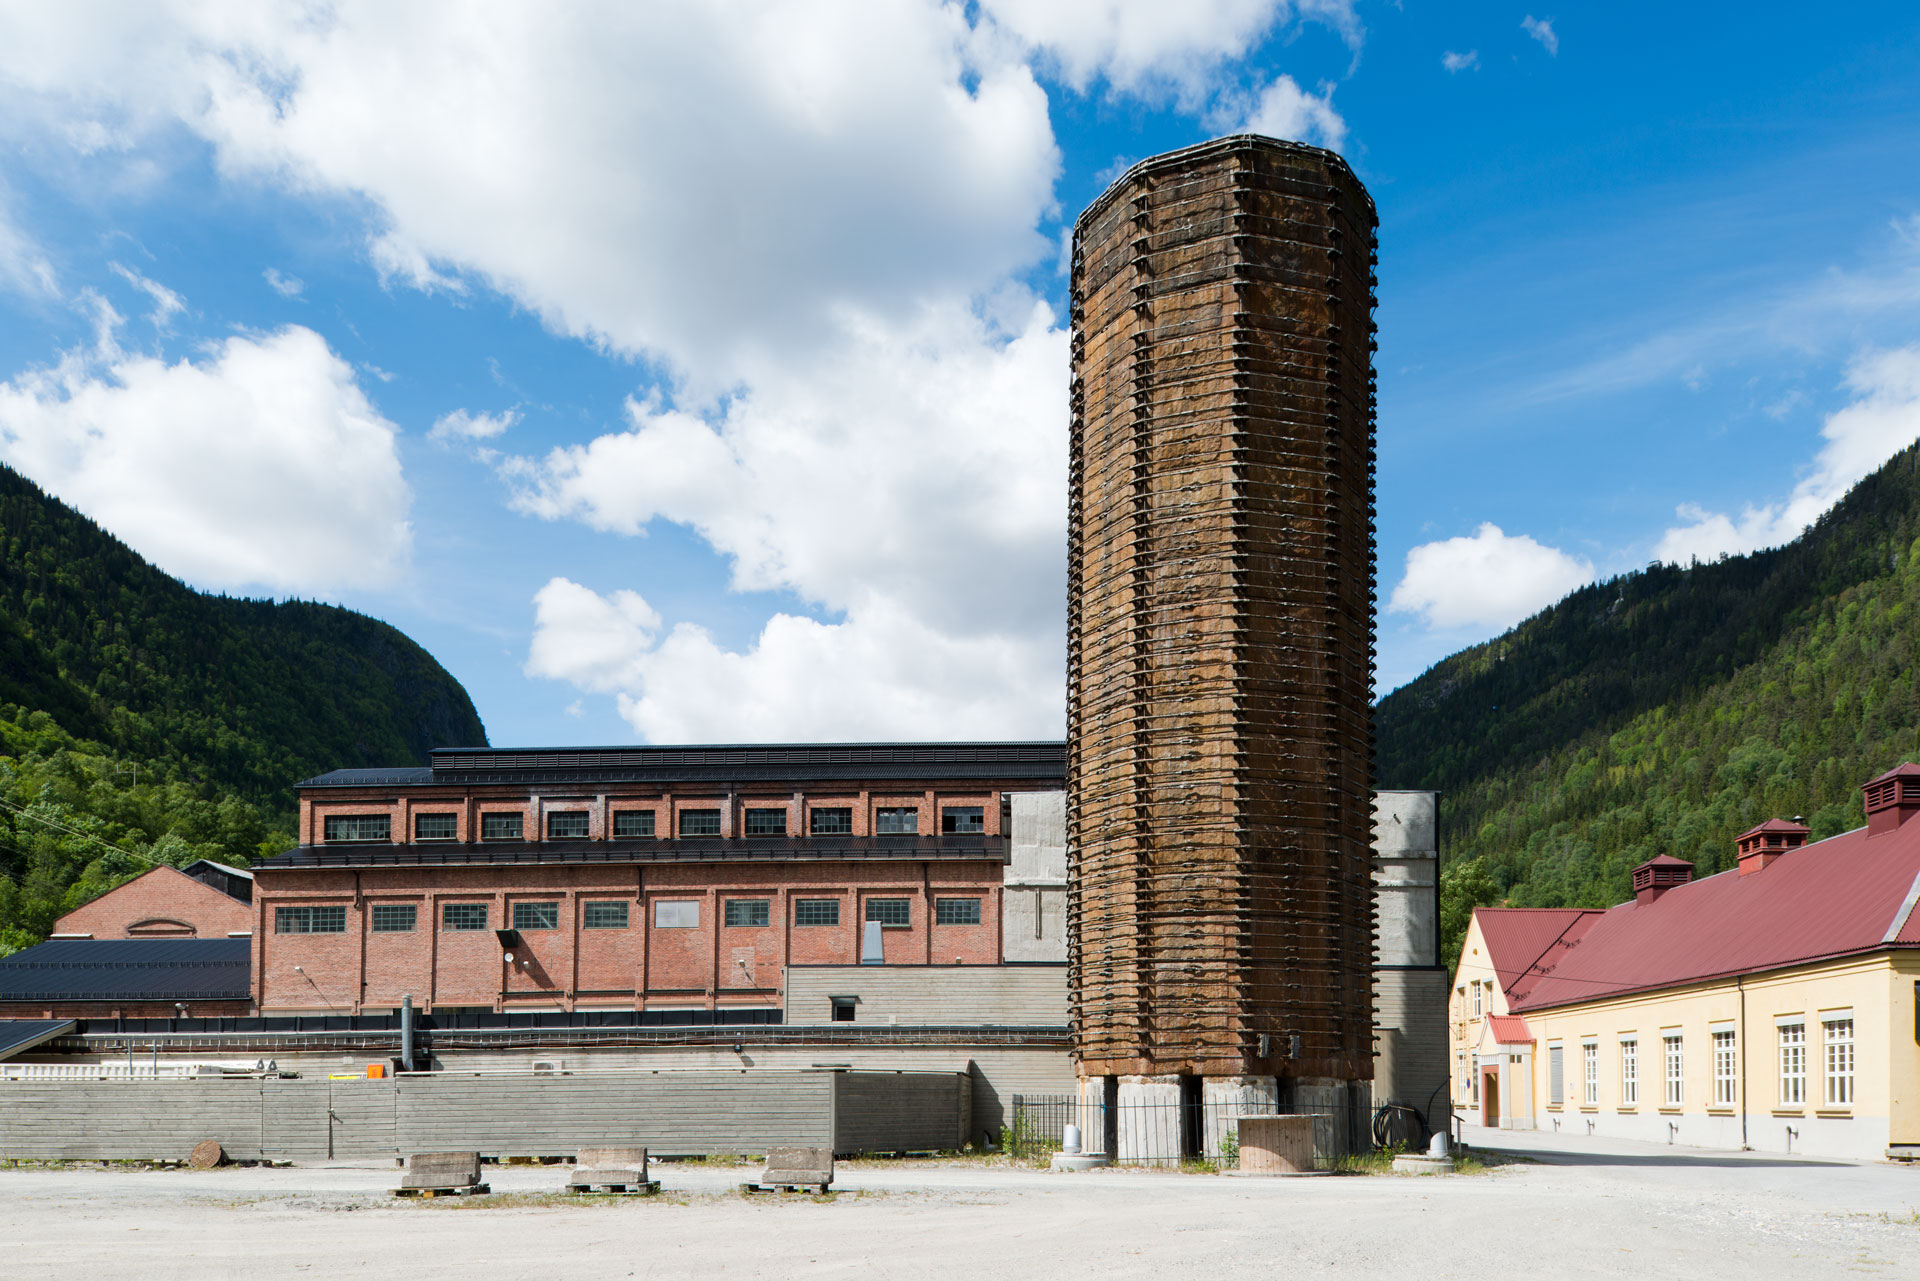 The acid tower is the only building that remains from the initial production plant ‘Rjukan I’ which began producing ammonium nitrate and “Norwegian salpeter” in November 1911. Photo: Per Berntsen, the Directorate for Cultural Heritage